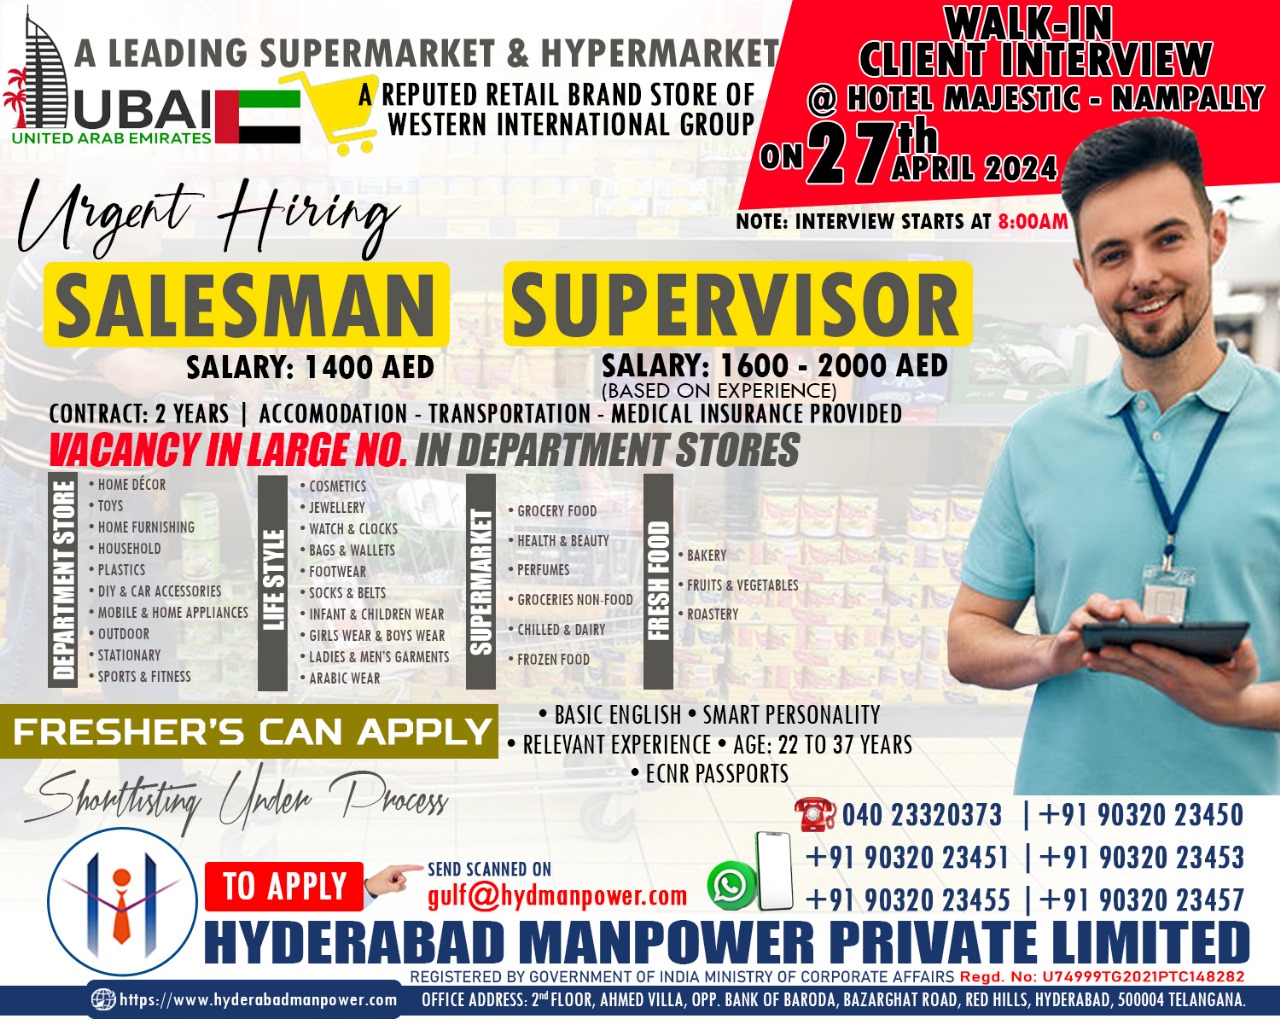 Client Interview in Hyderabad on 27th April 2024